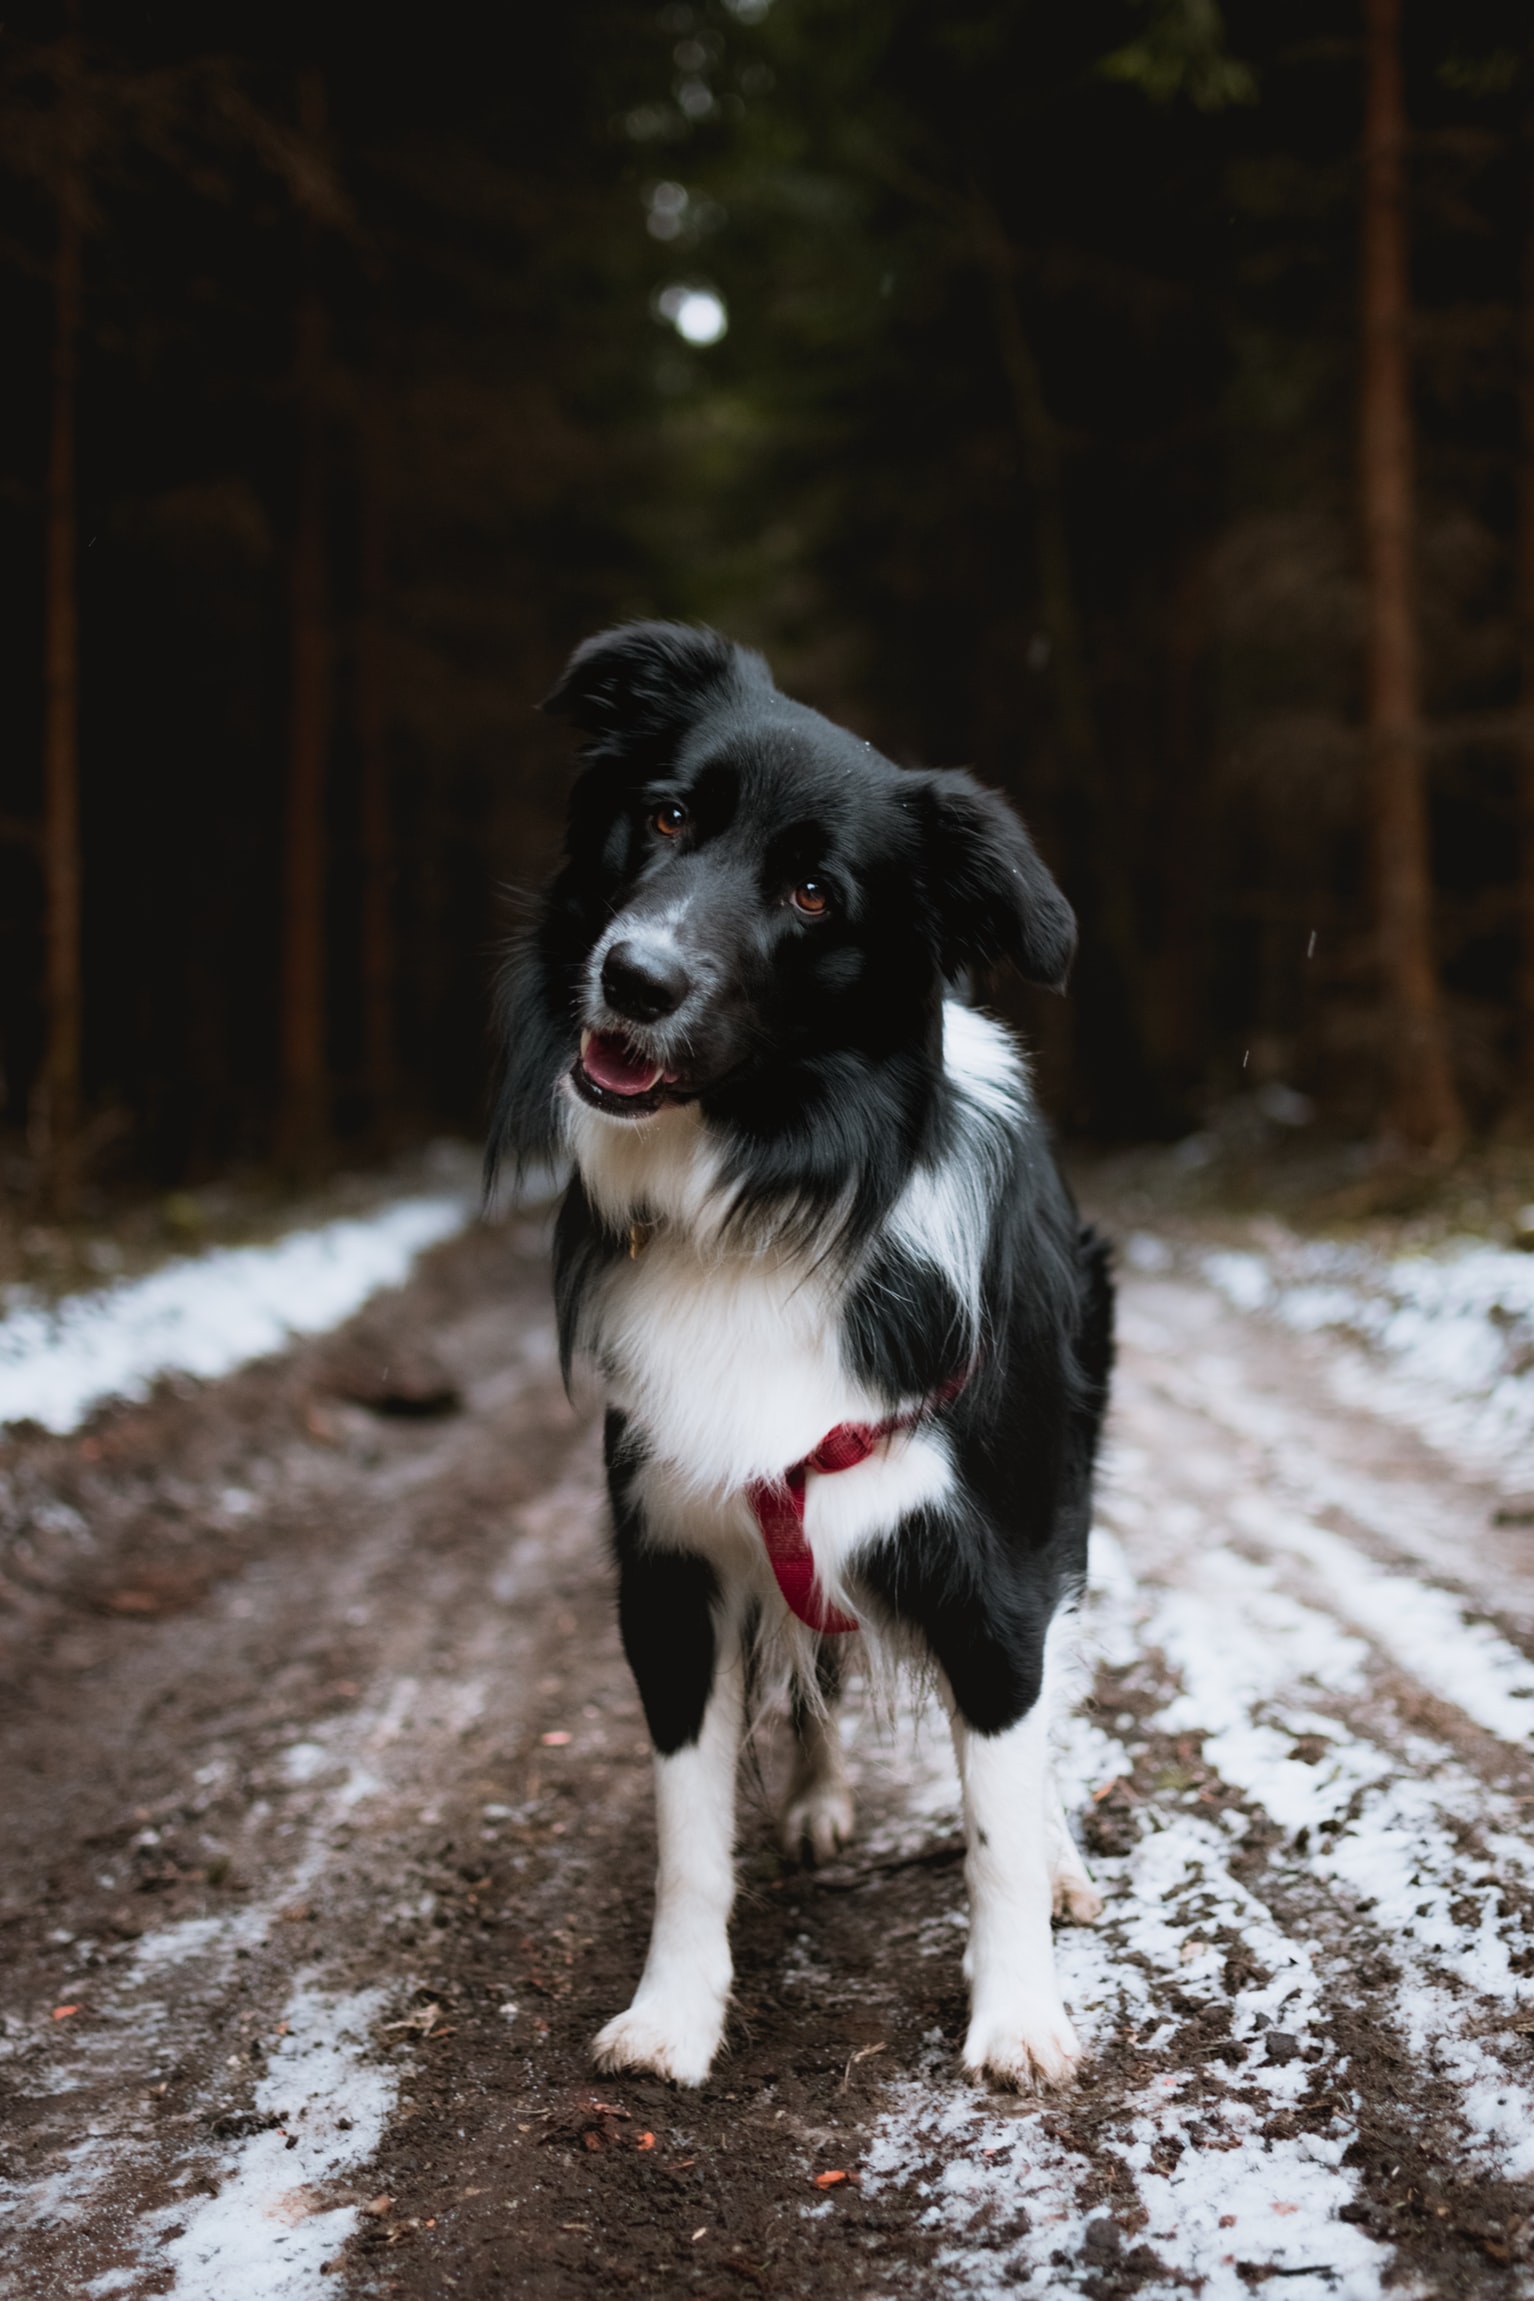 A Border Collie standing on the road while tilting its head